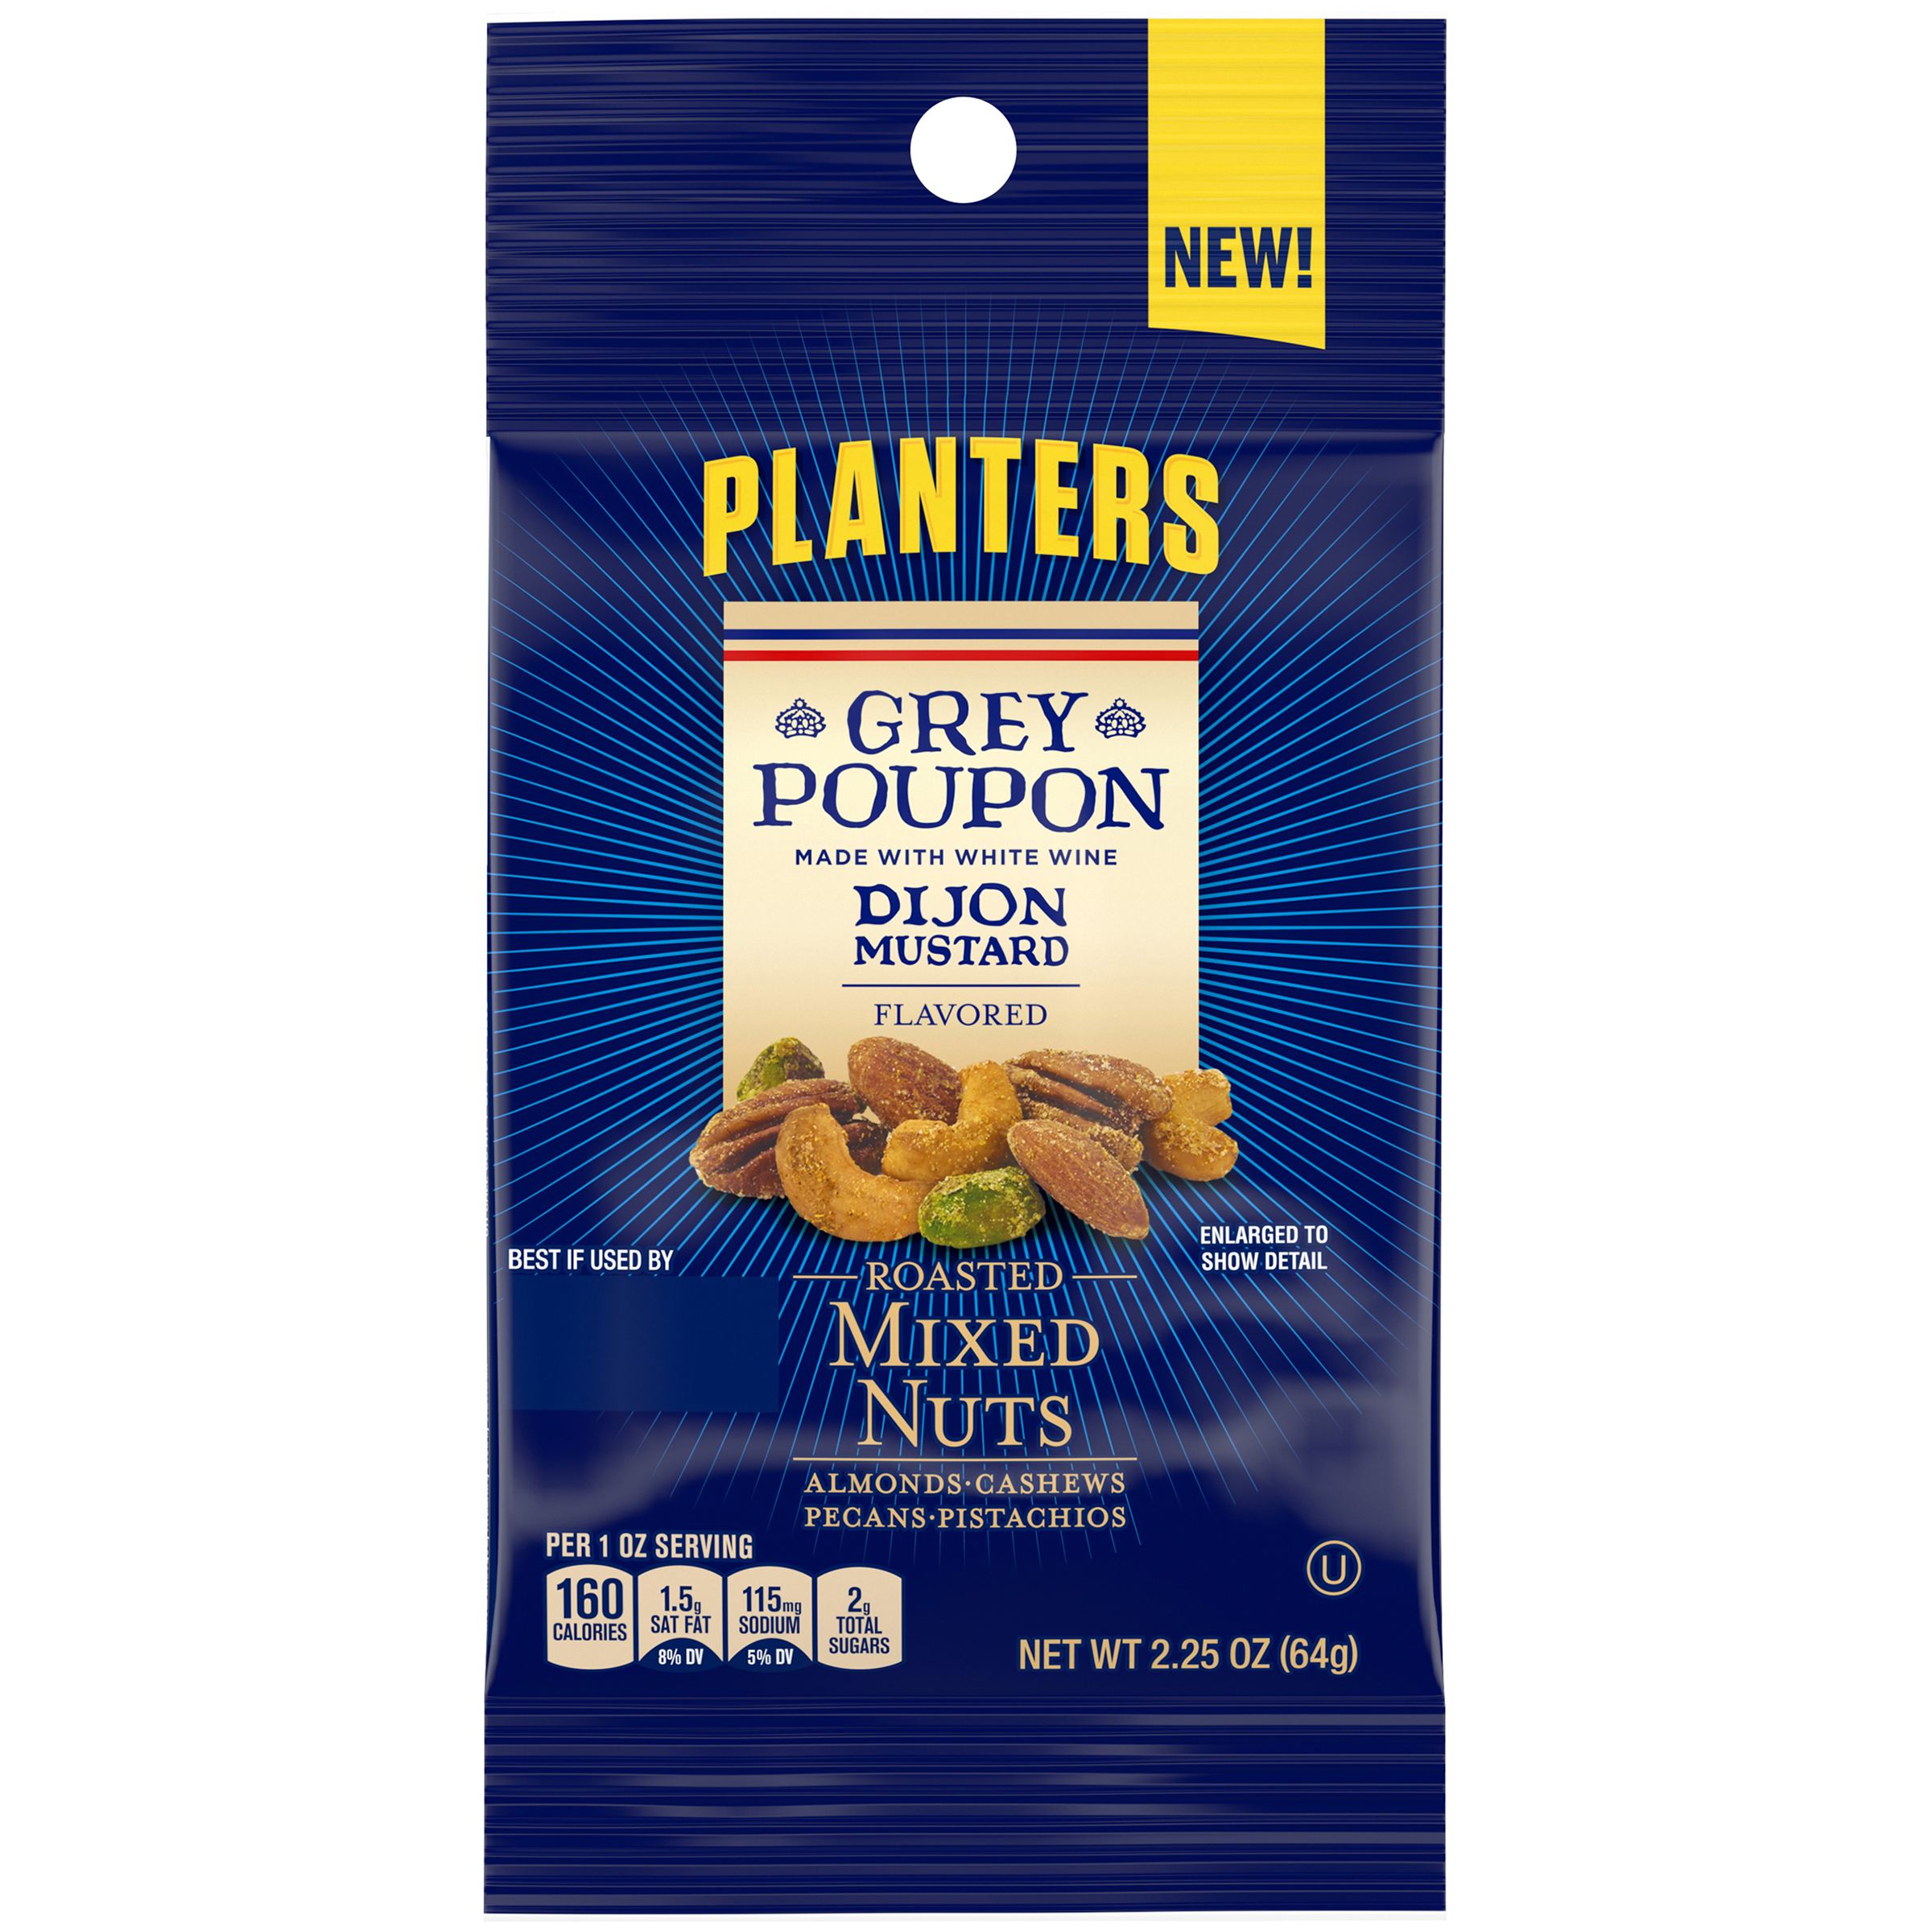 PLANTERS® Grey Poupon Deluxe Mixed Nuts 2.25 oz packets